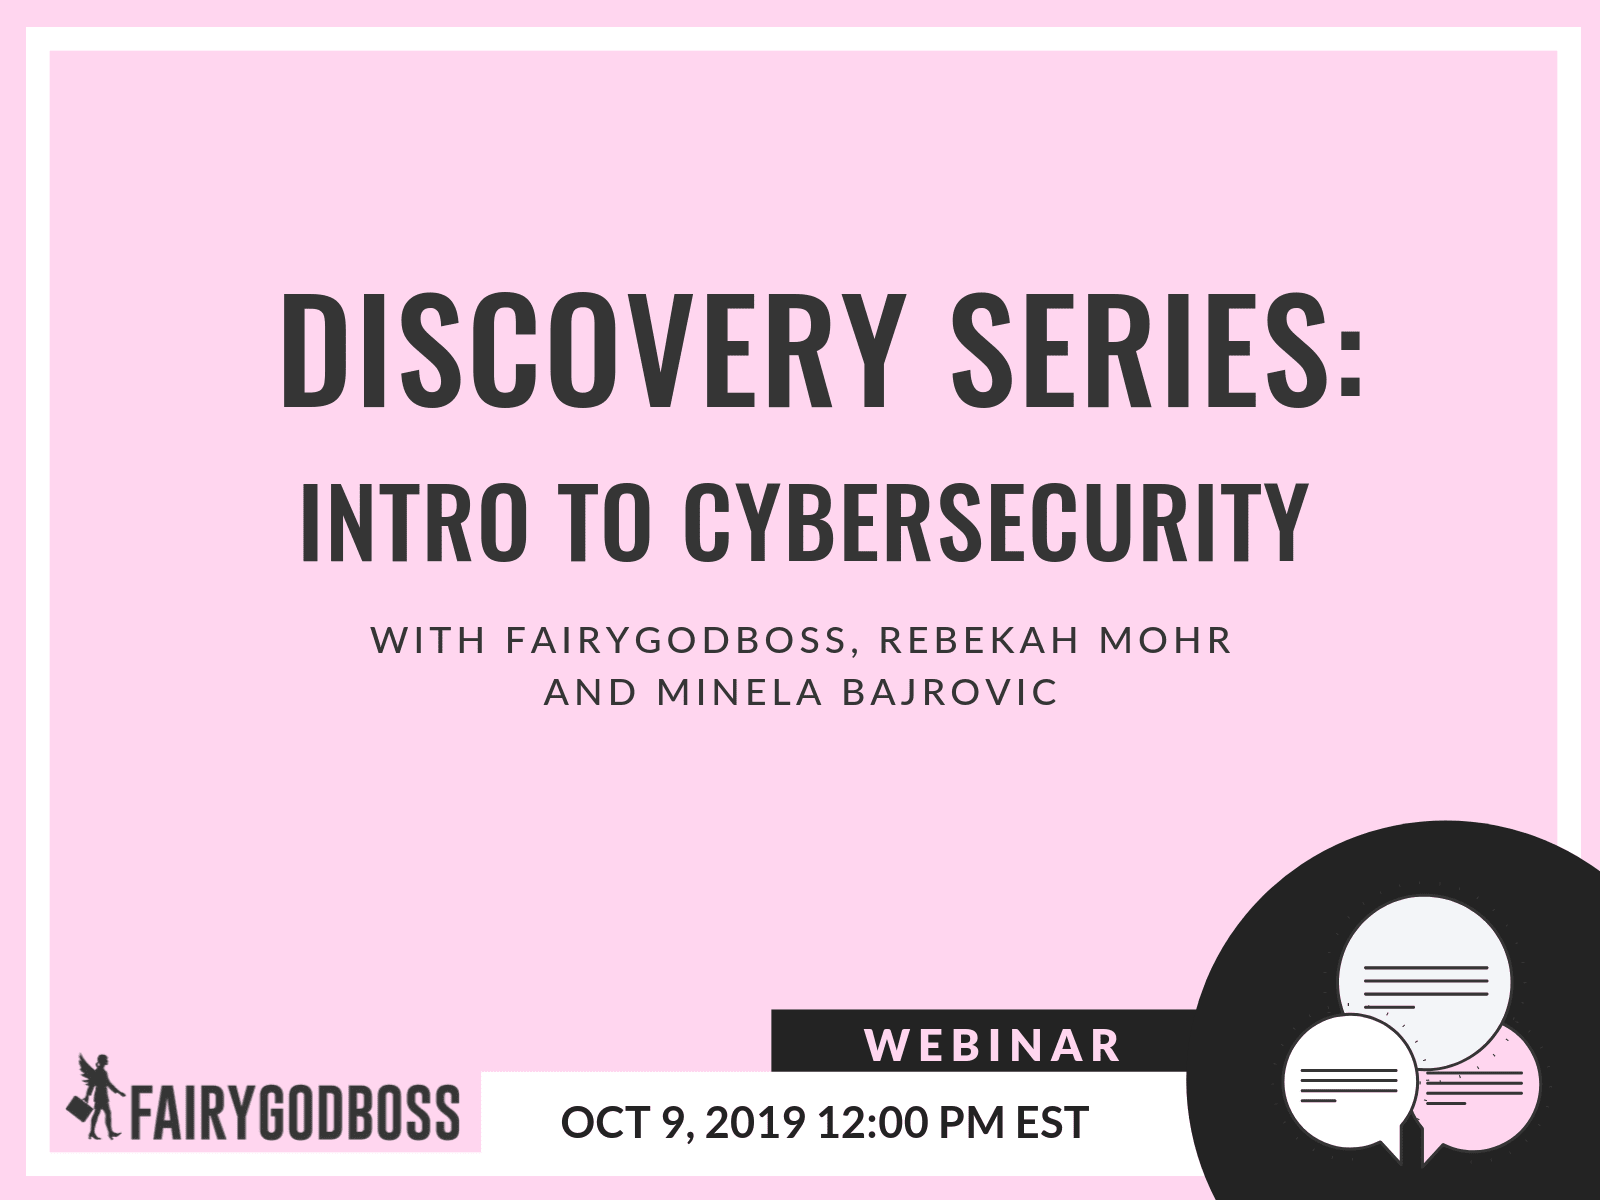 Discovery Series: Intro to Cybersecurity